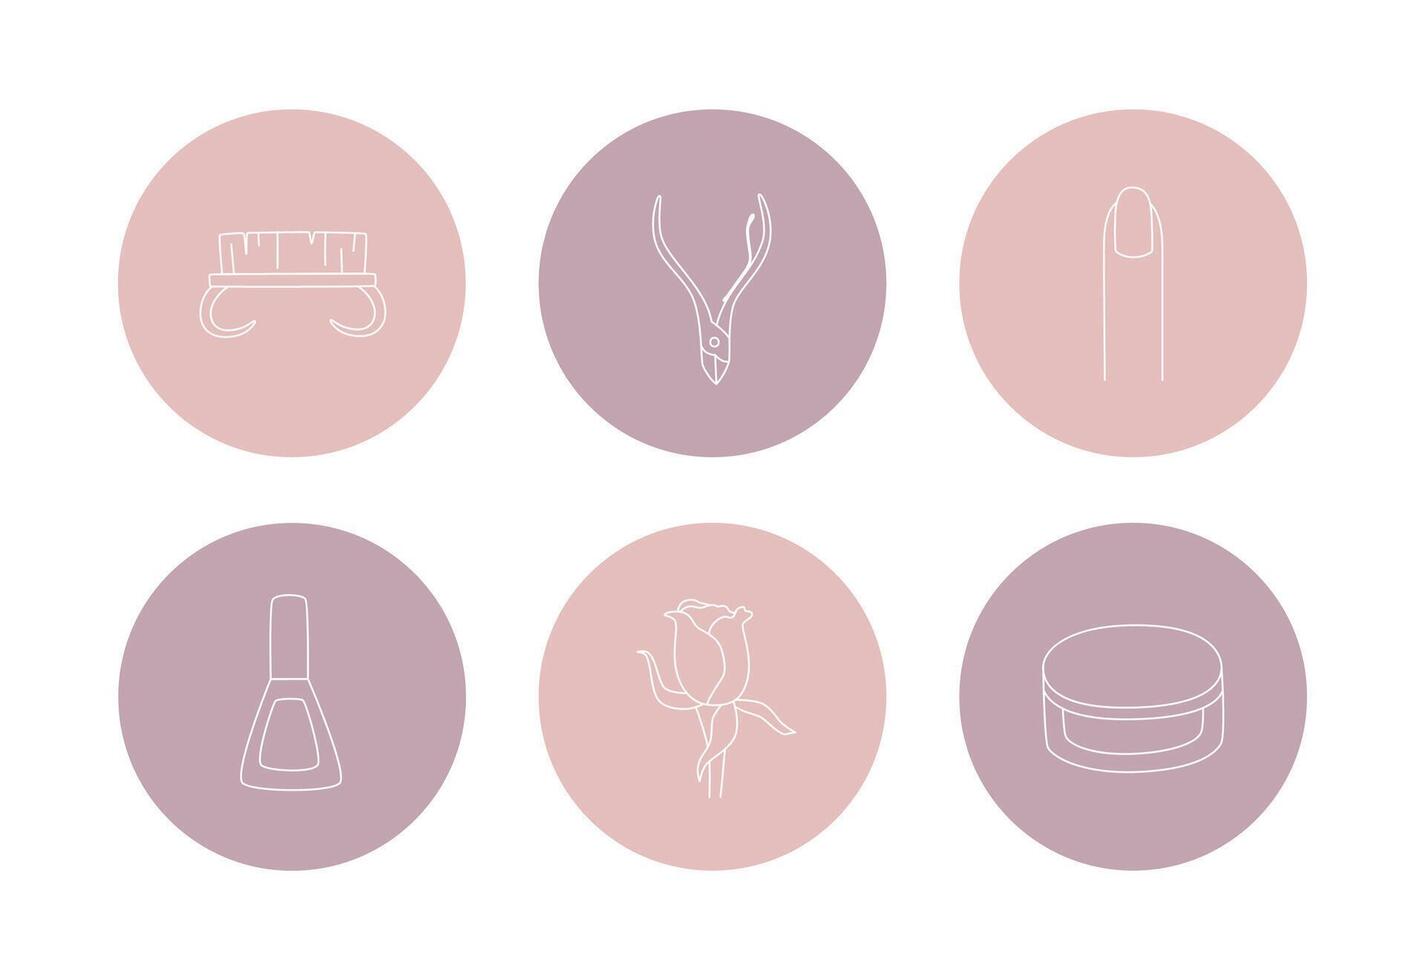 Highlights covers, posts, and stories for social media. Hand-drawn icons for manicure, contour vector illustration.